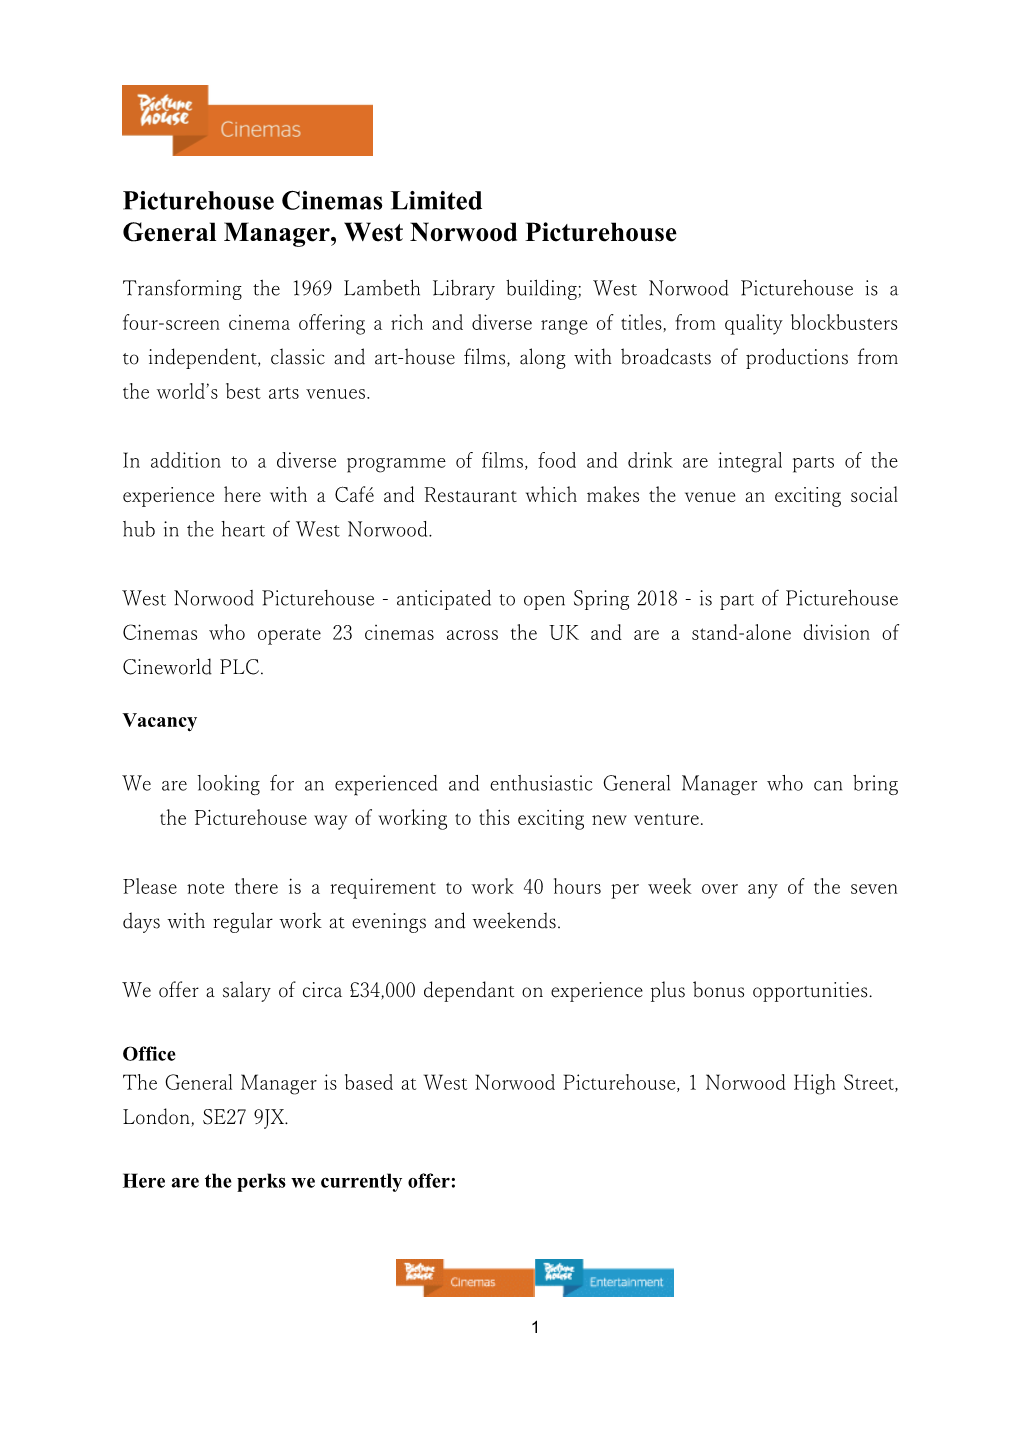 General Manager, West Norwoodpicturehouse